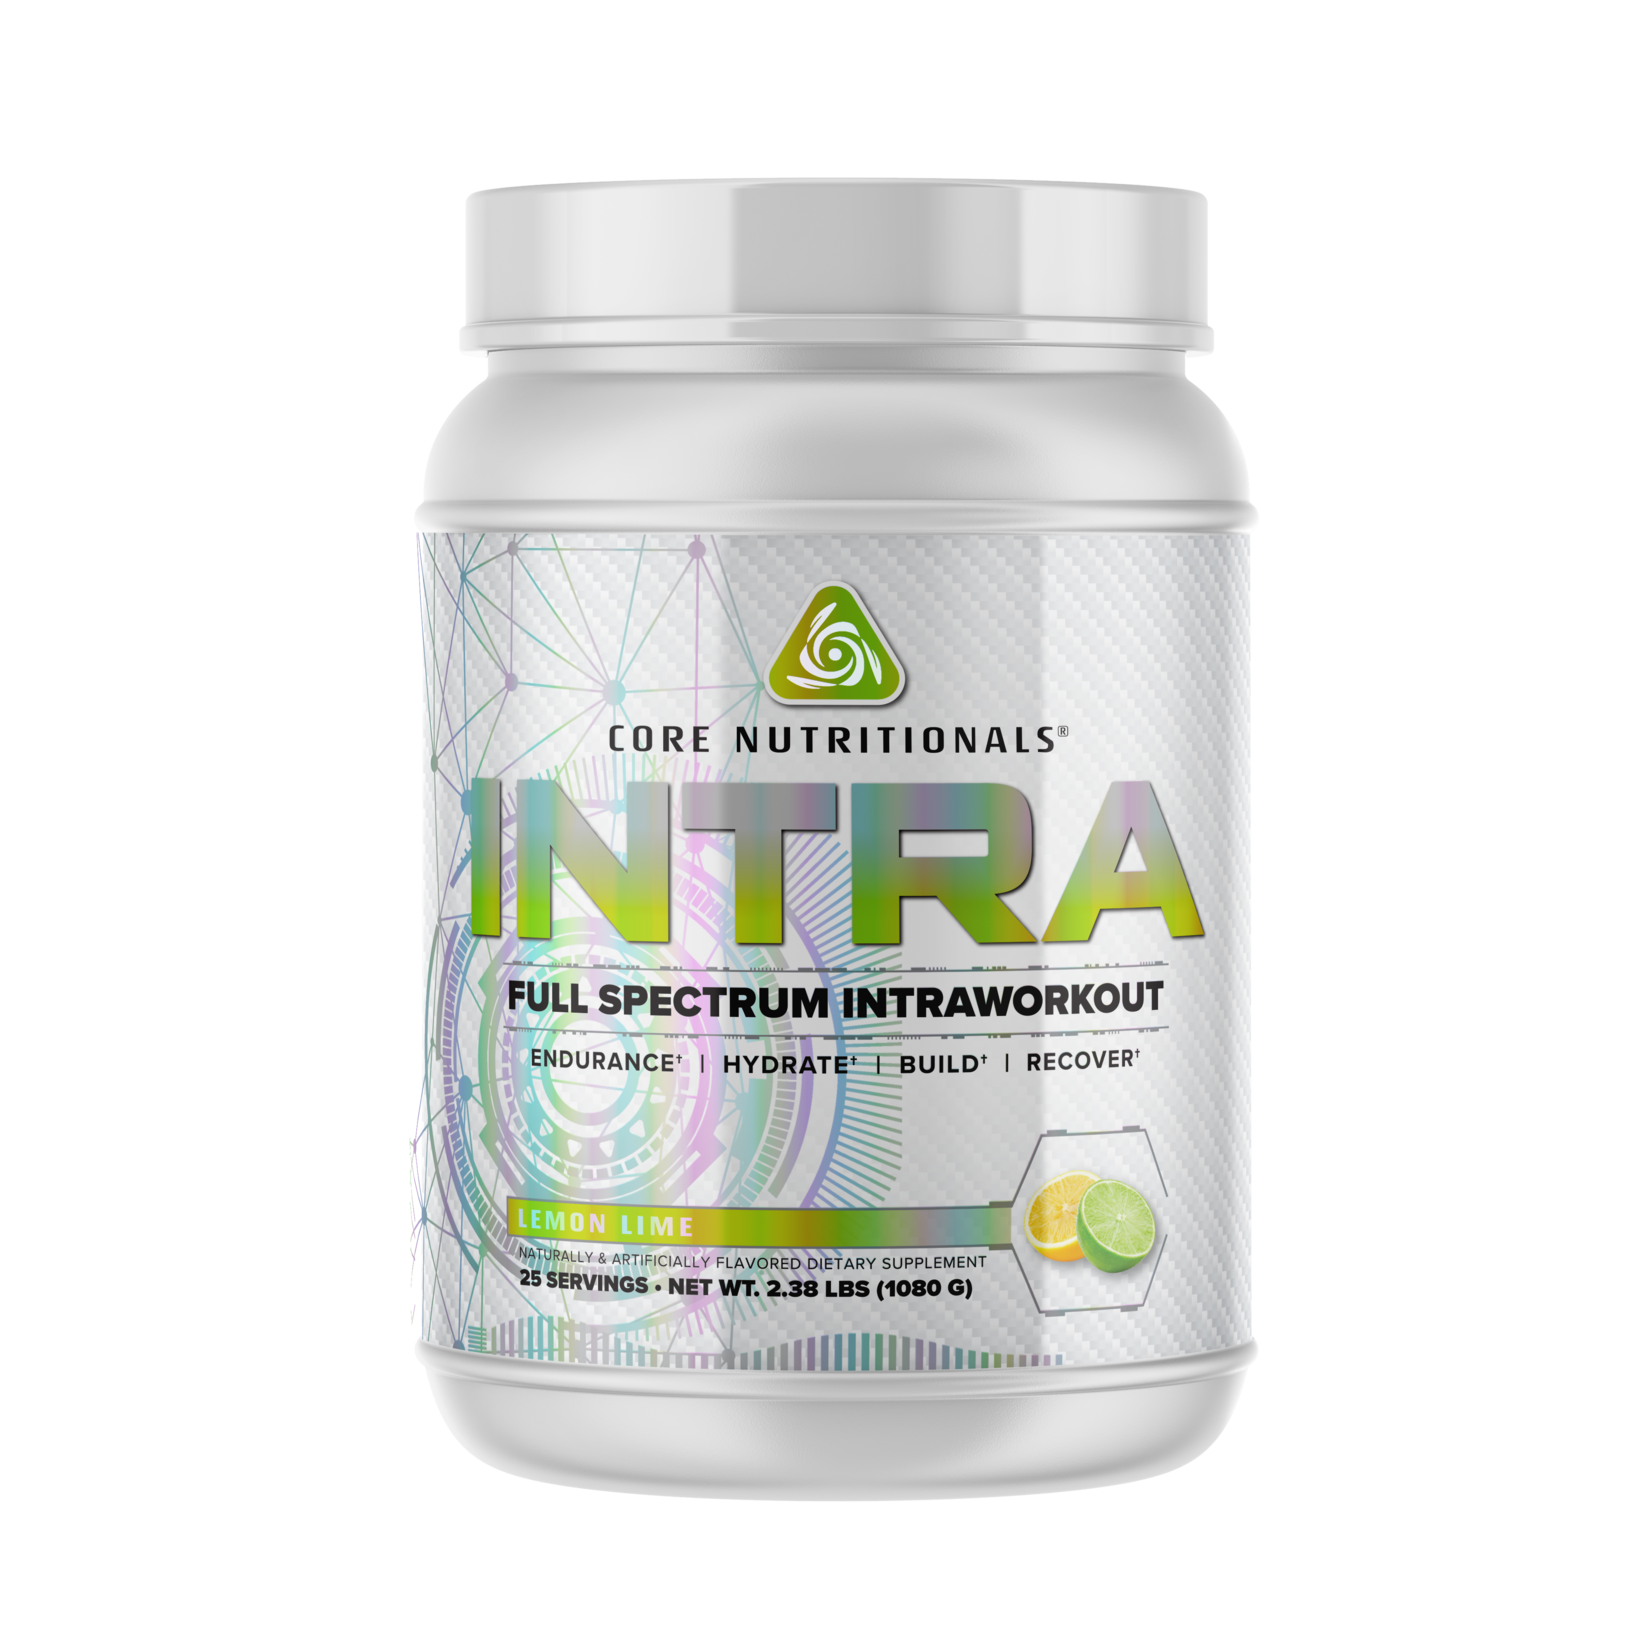 Core Nutritionals Core INTRA